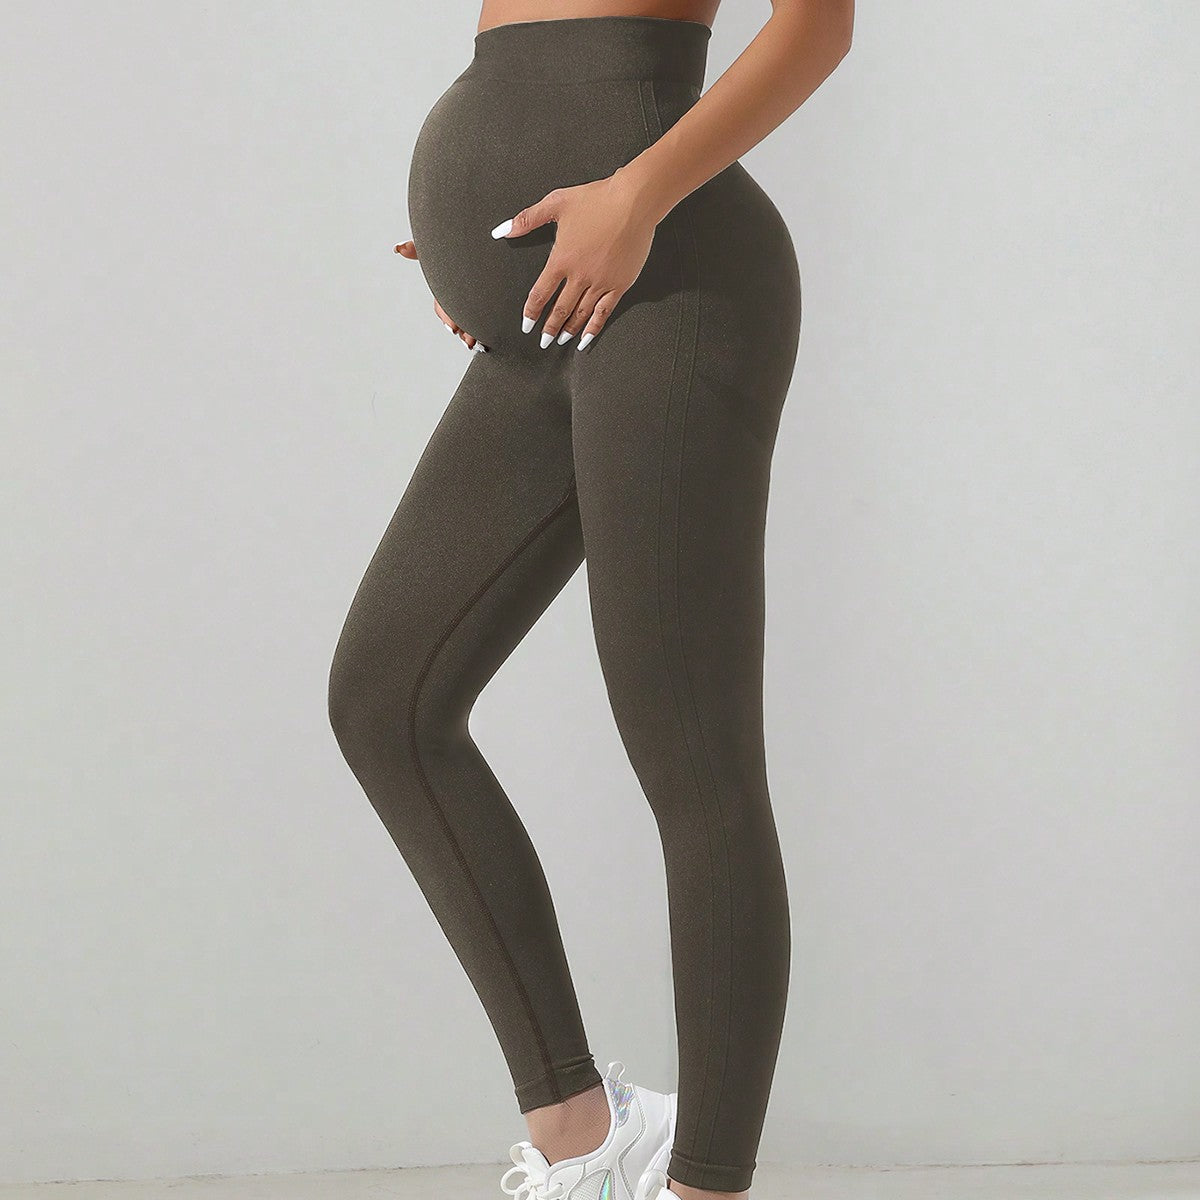 Elite+ Pregnant Women Seamless Belly Support Outer Wear Yoga Pants